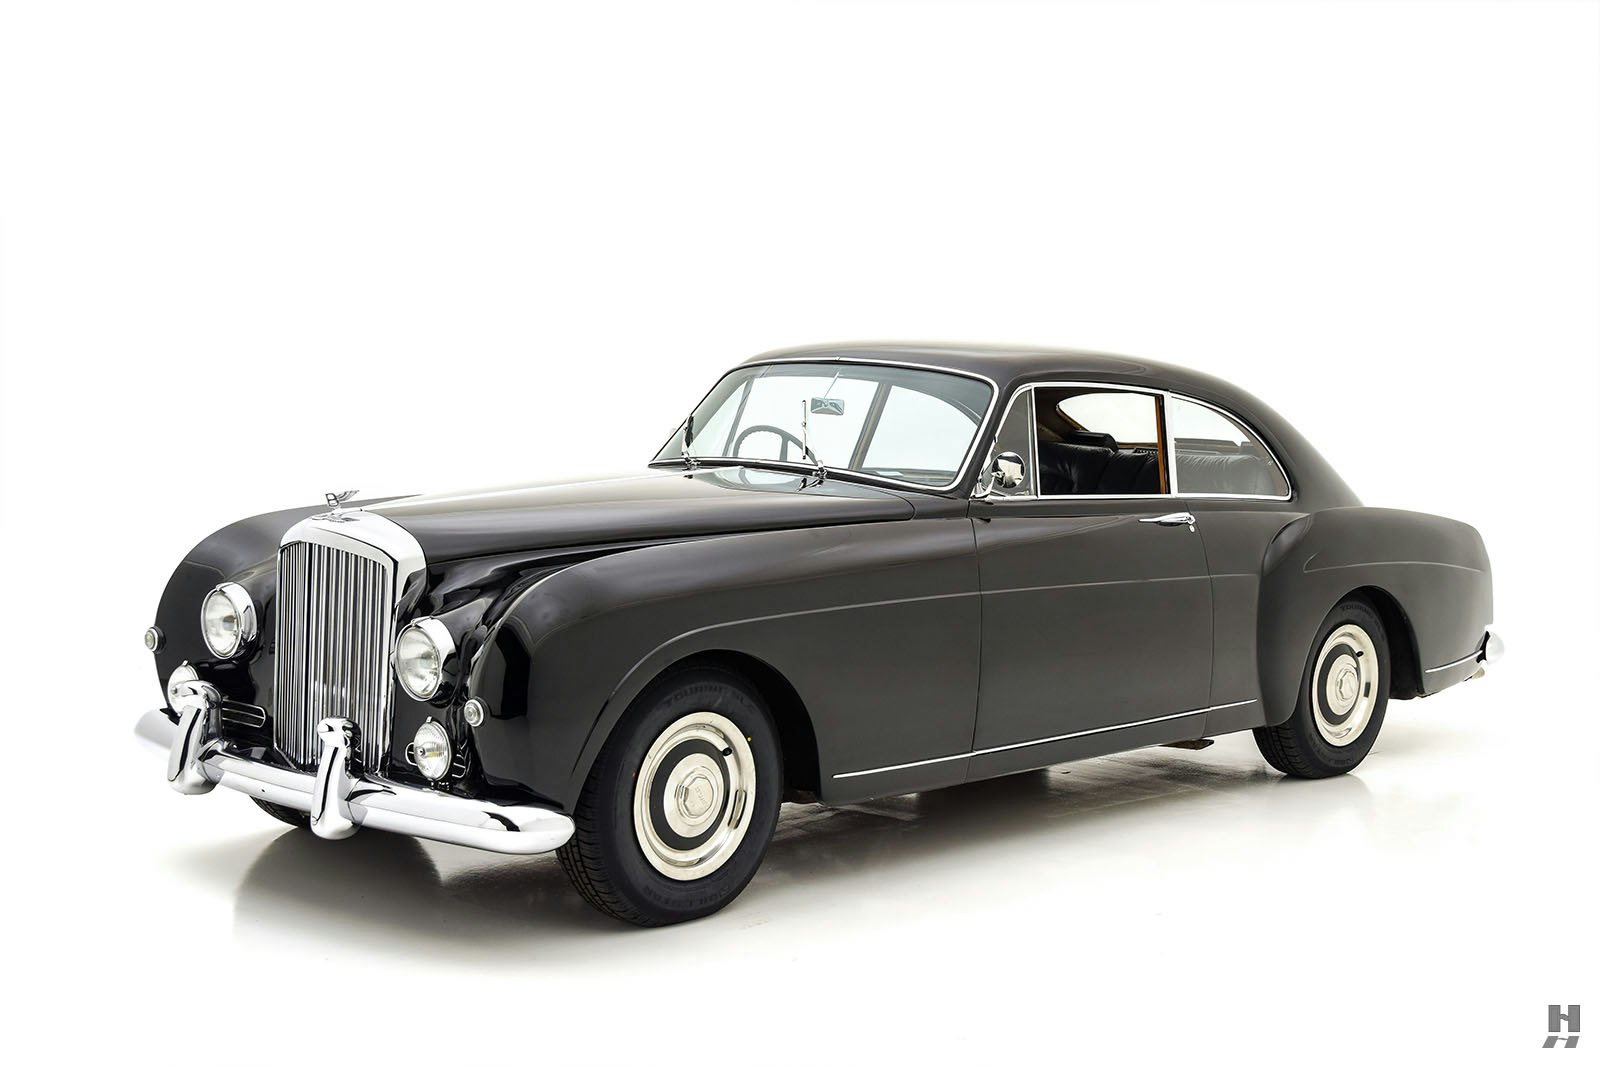 1956 Bentley S1 Continental 2dr Fixed-Head Coupe by H.J. Mulliner, Courtesy of Hyman Ltd.